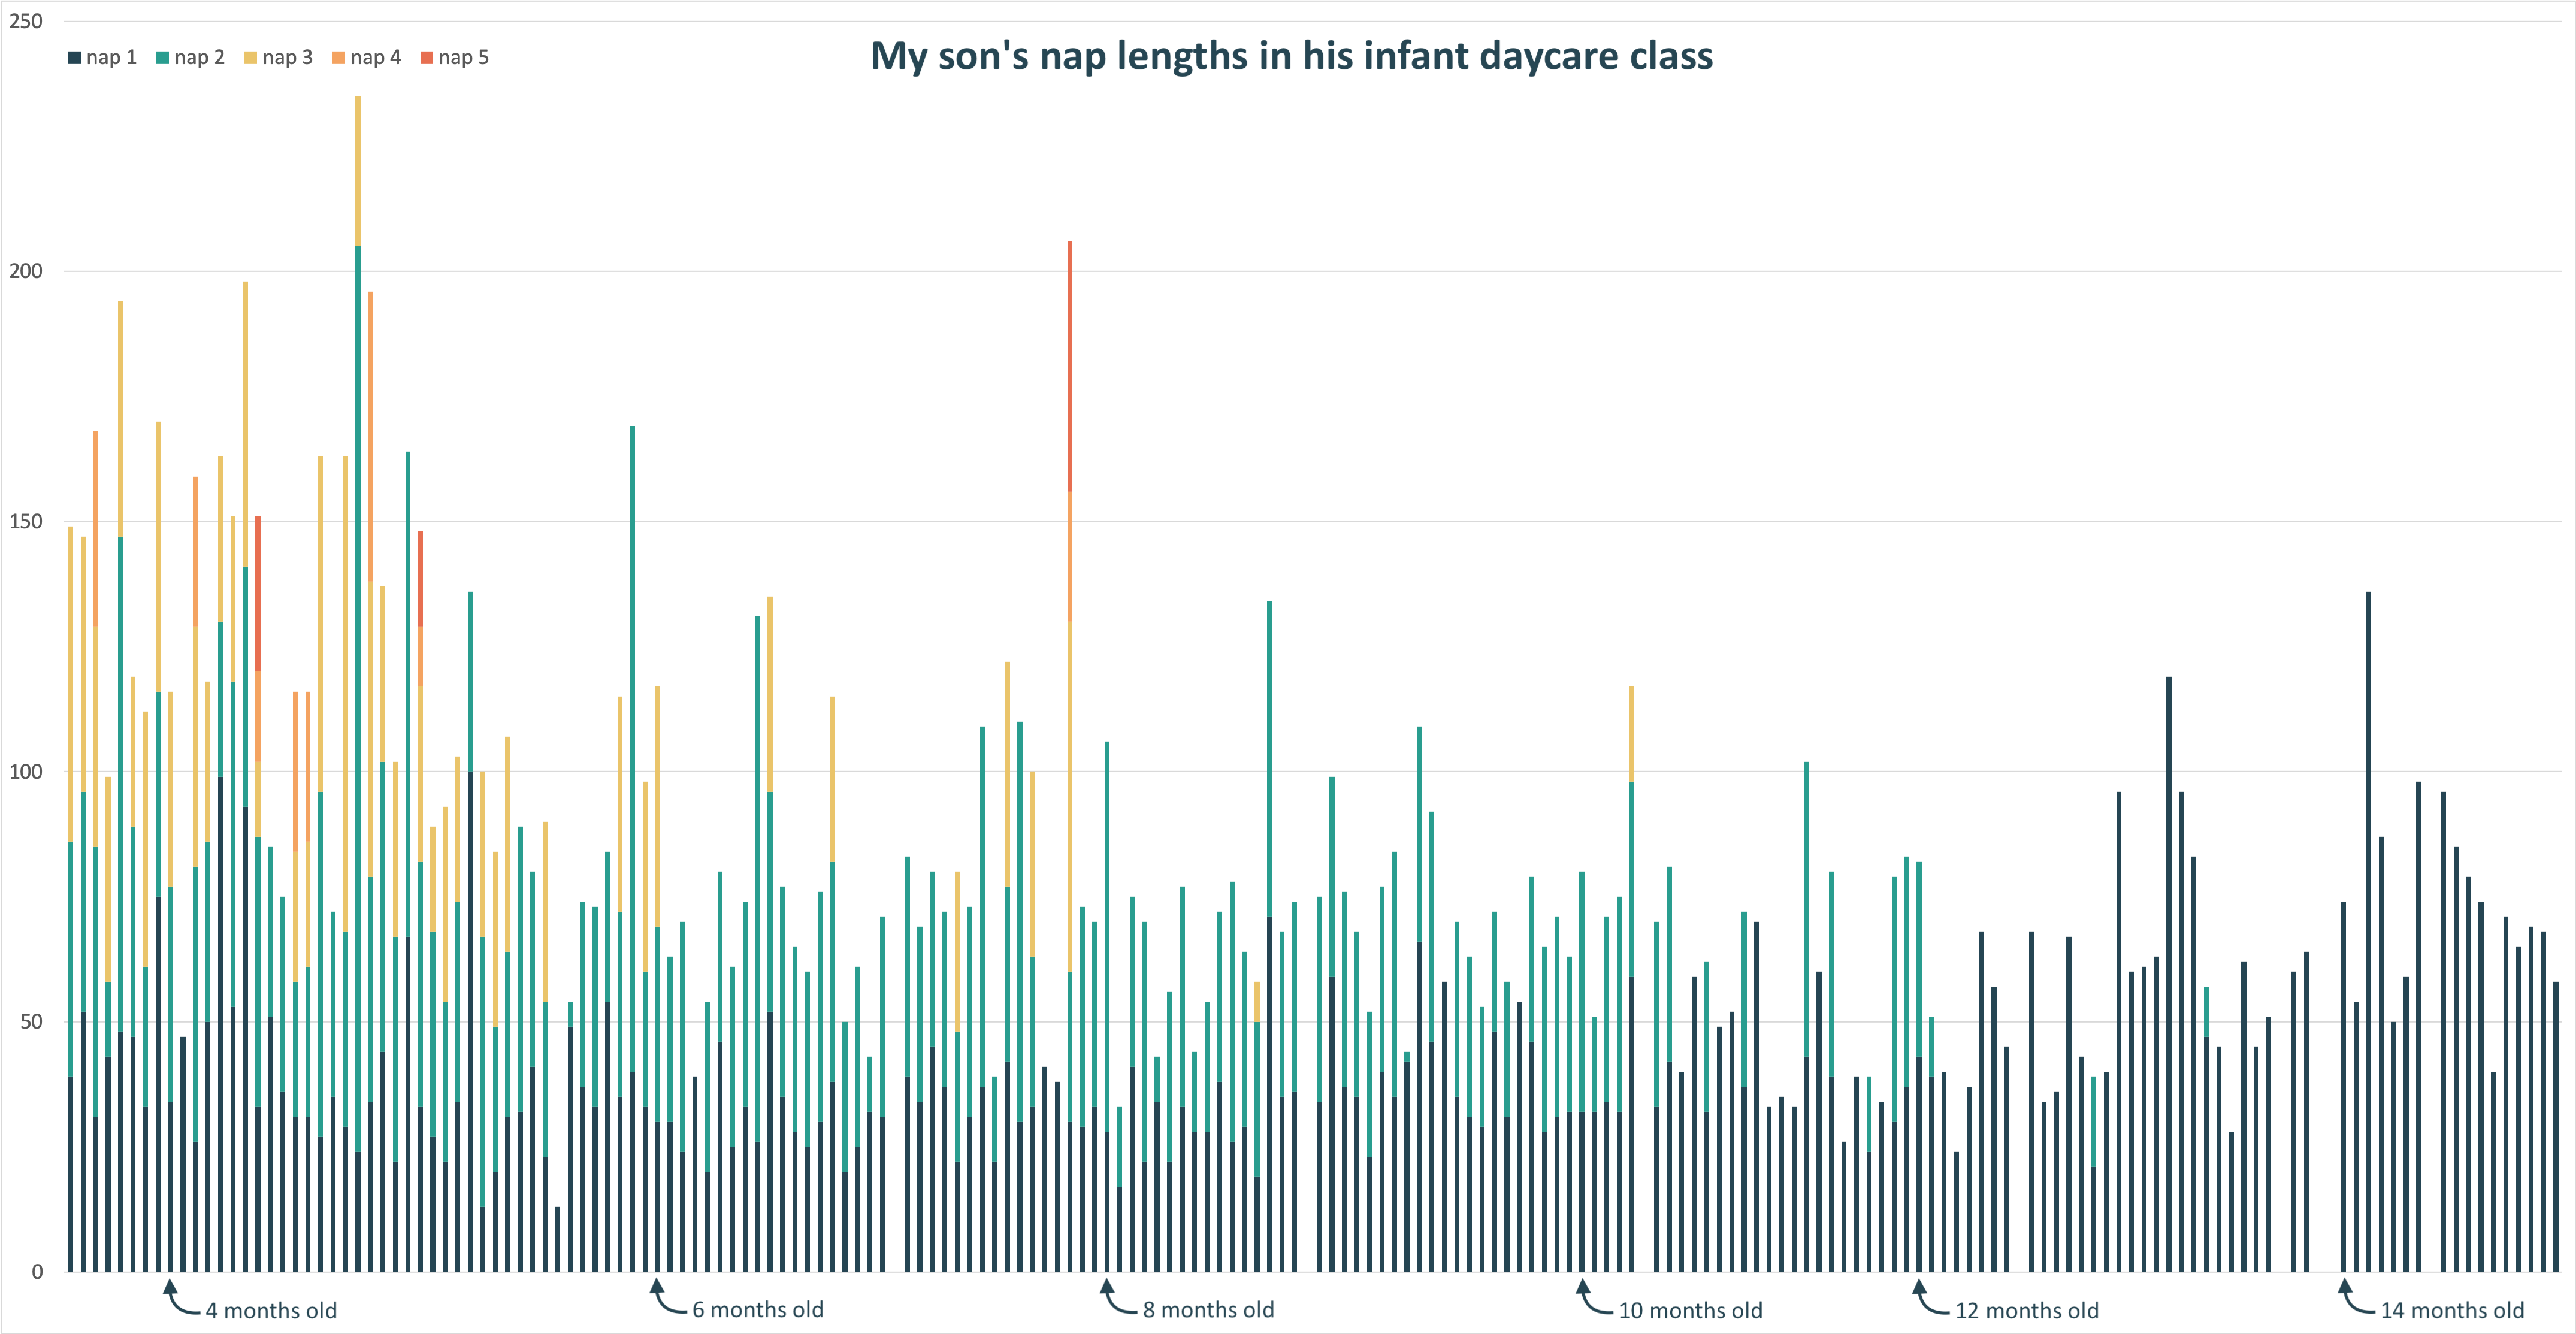 My Son's Nap Lengths in His Infant Daycare Class